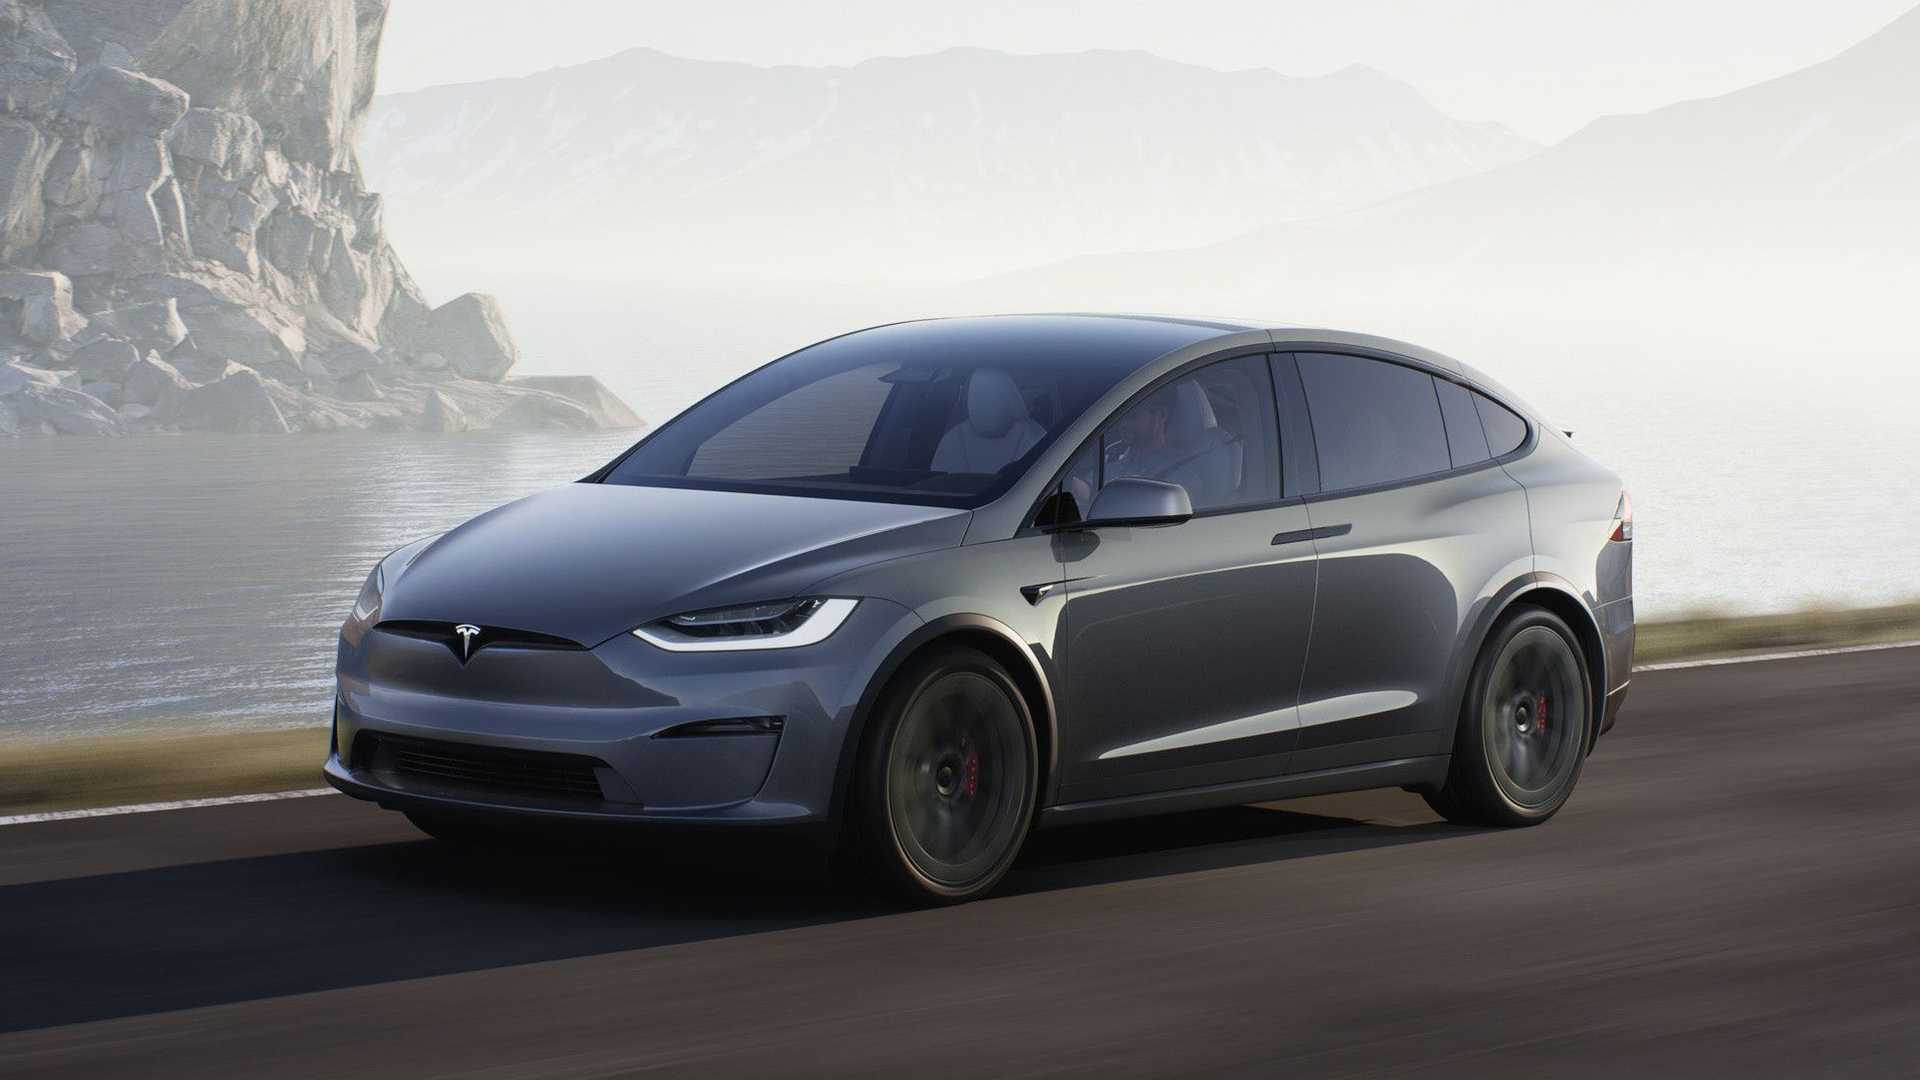 Check Out 2022 Tesla Model X Official EPA Range/Efficiency Ratings